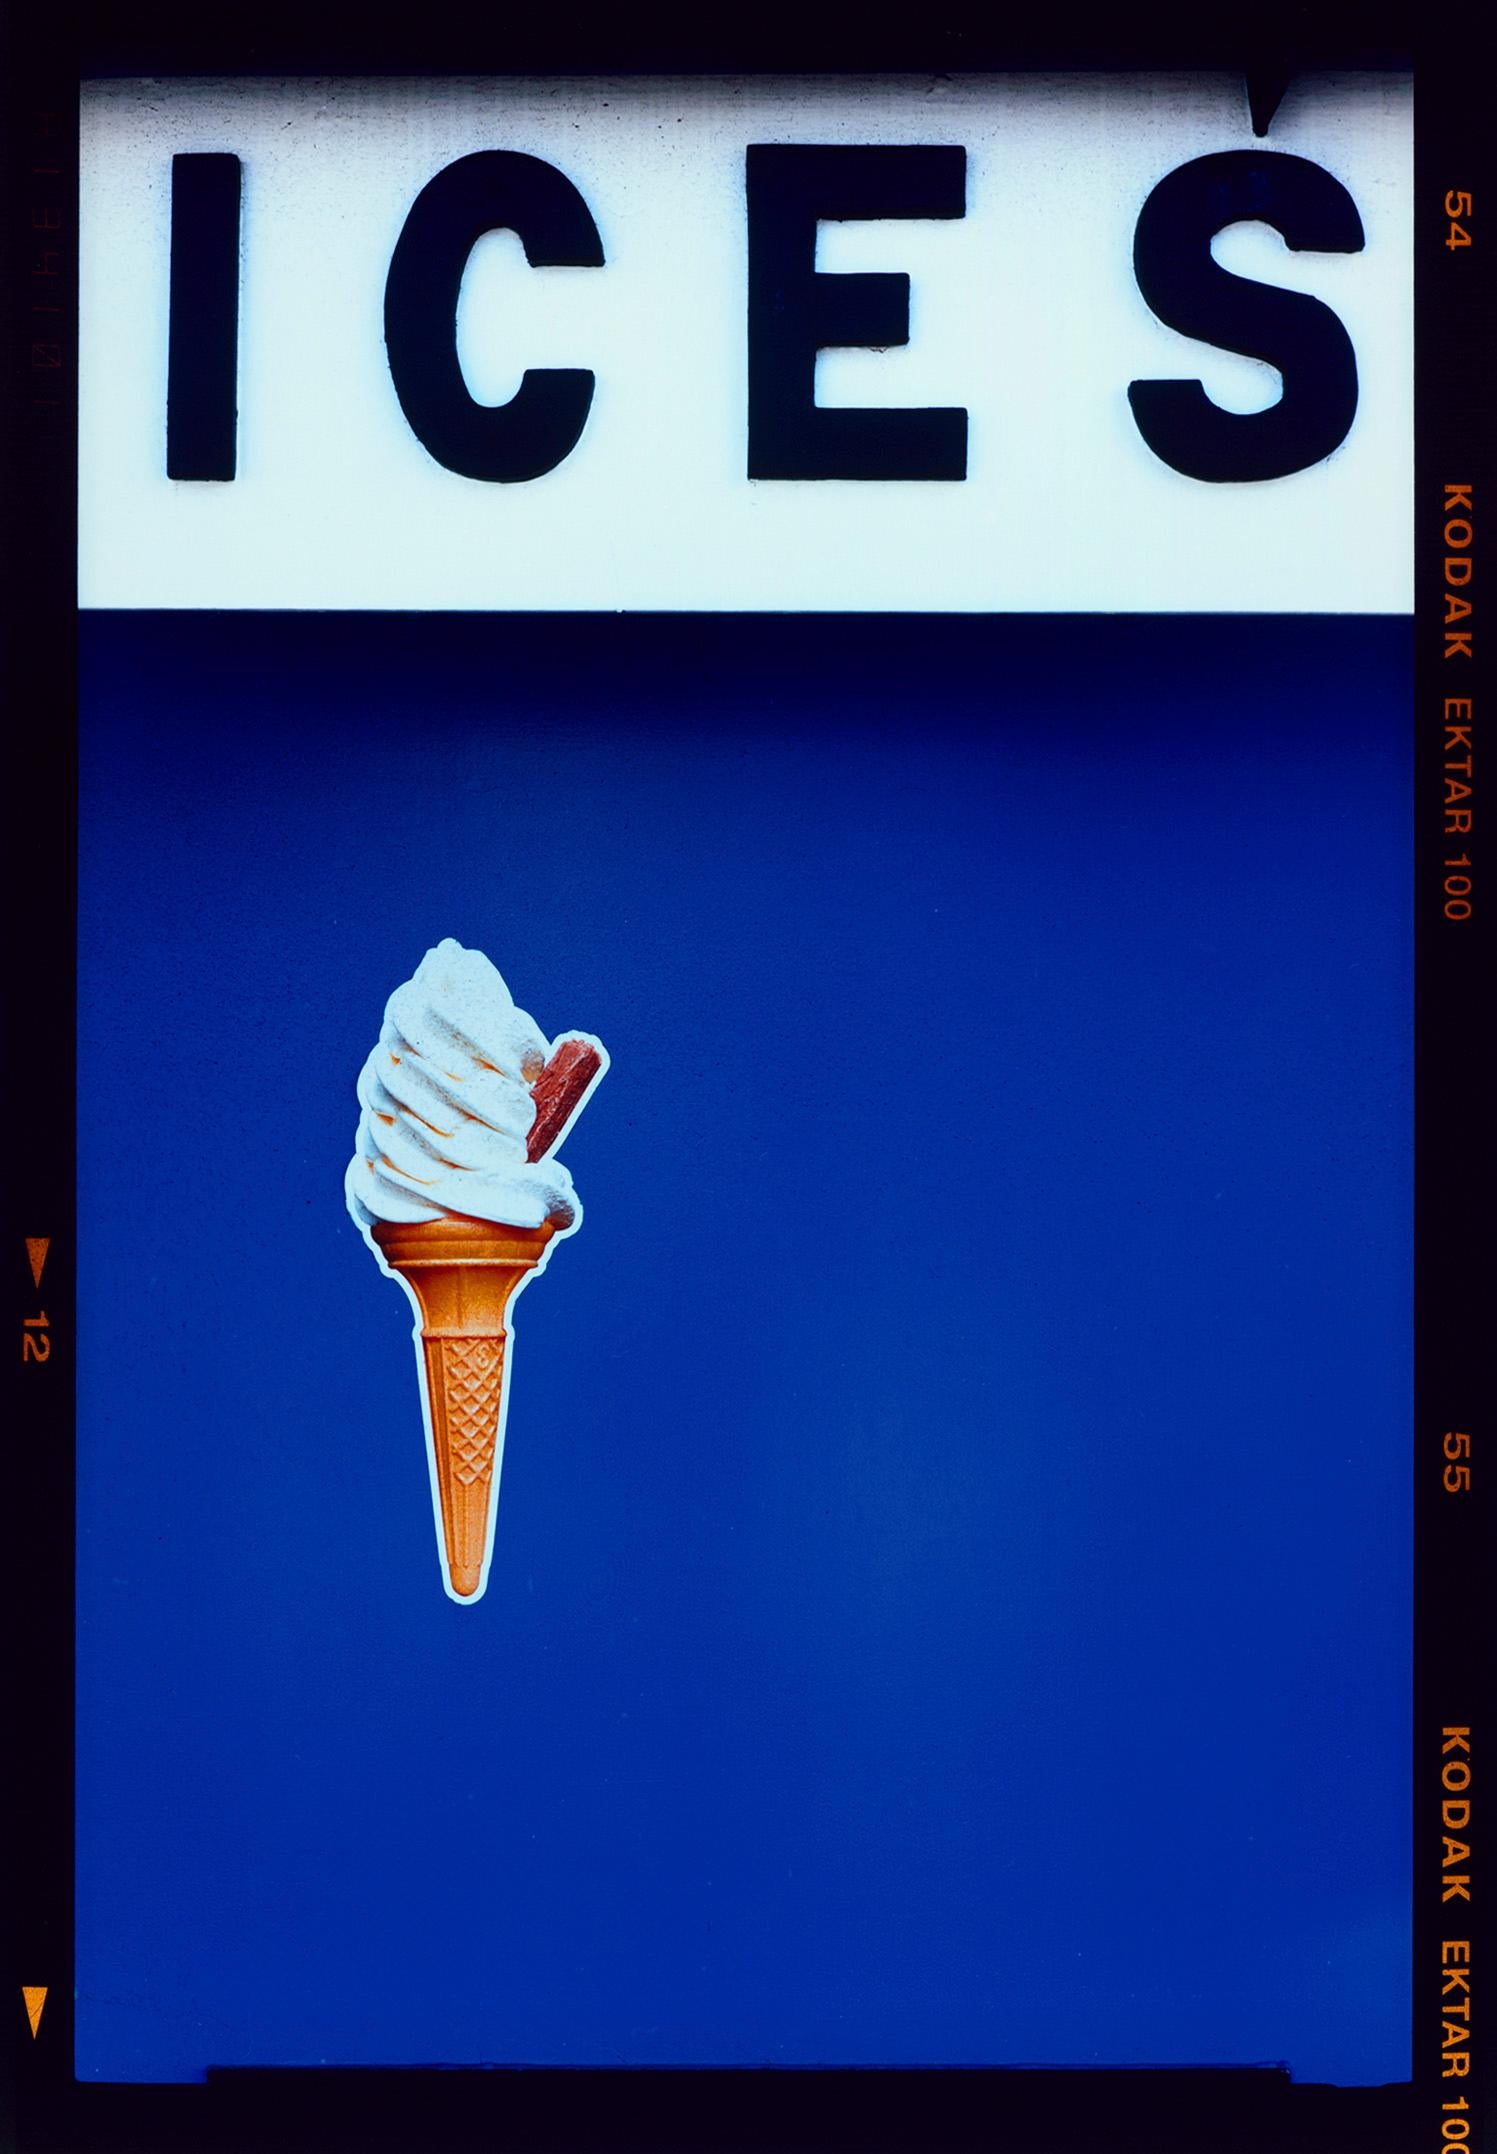 Ices, Bexhill-on-Sea - British seaside color photography